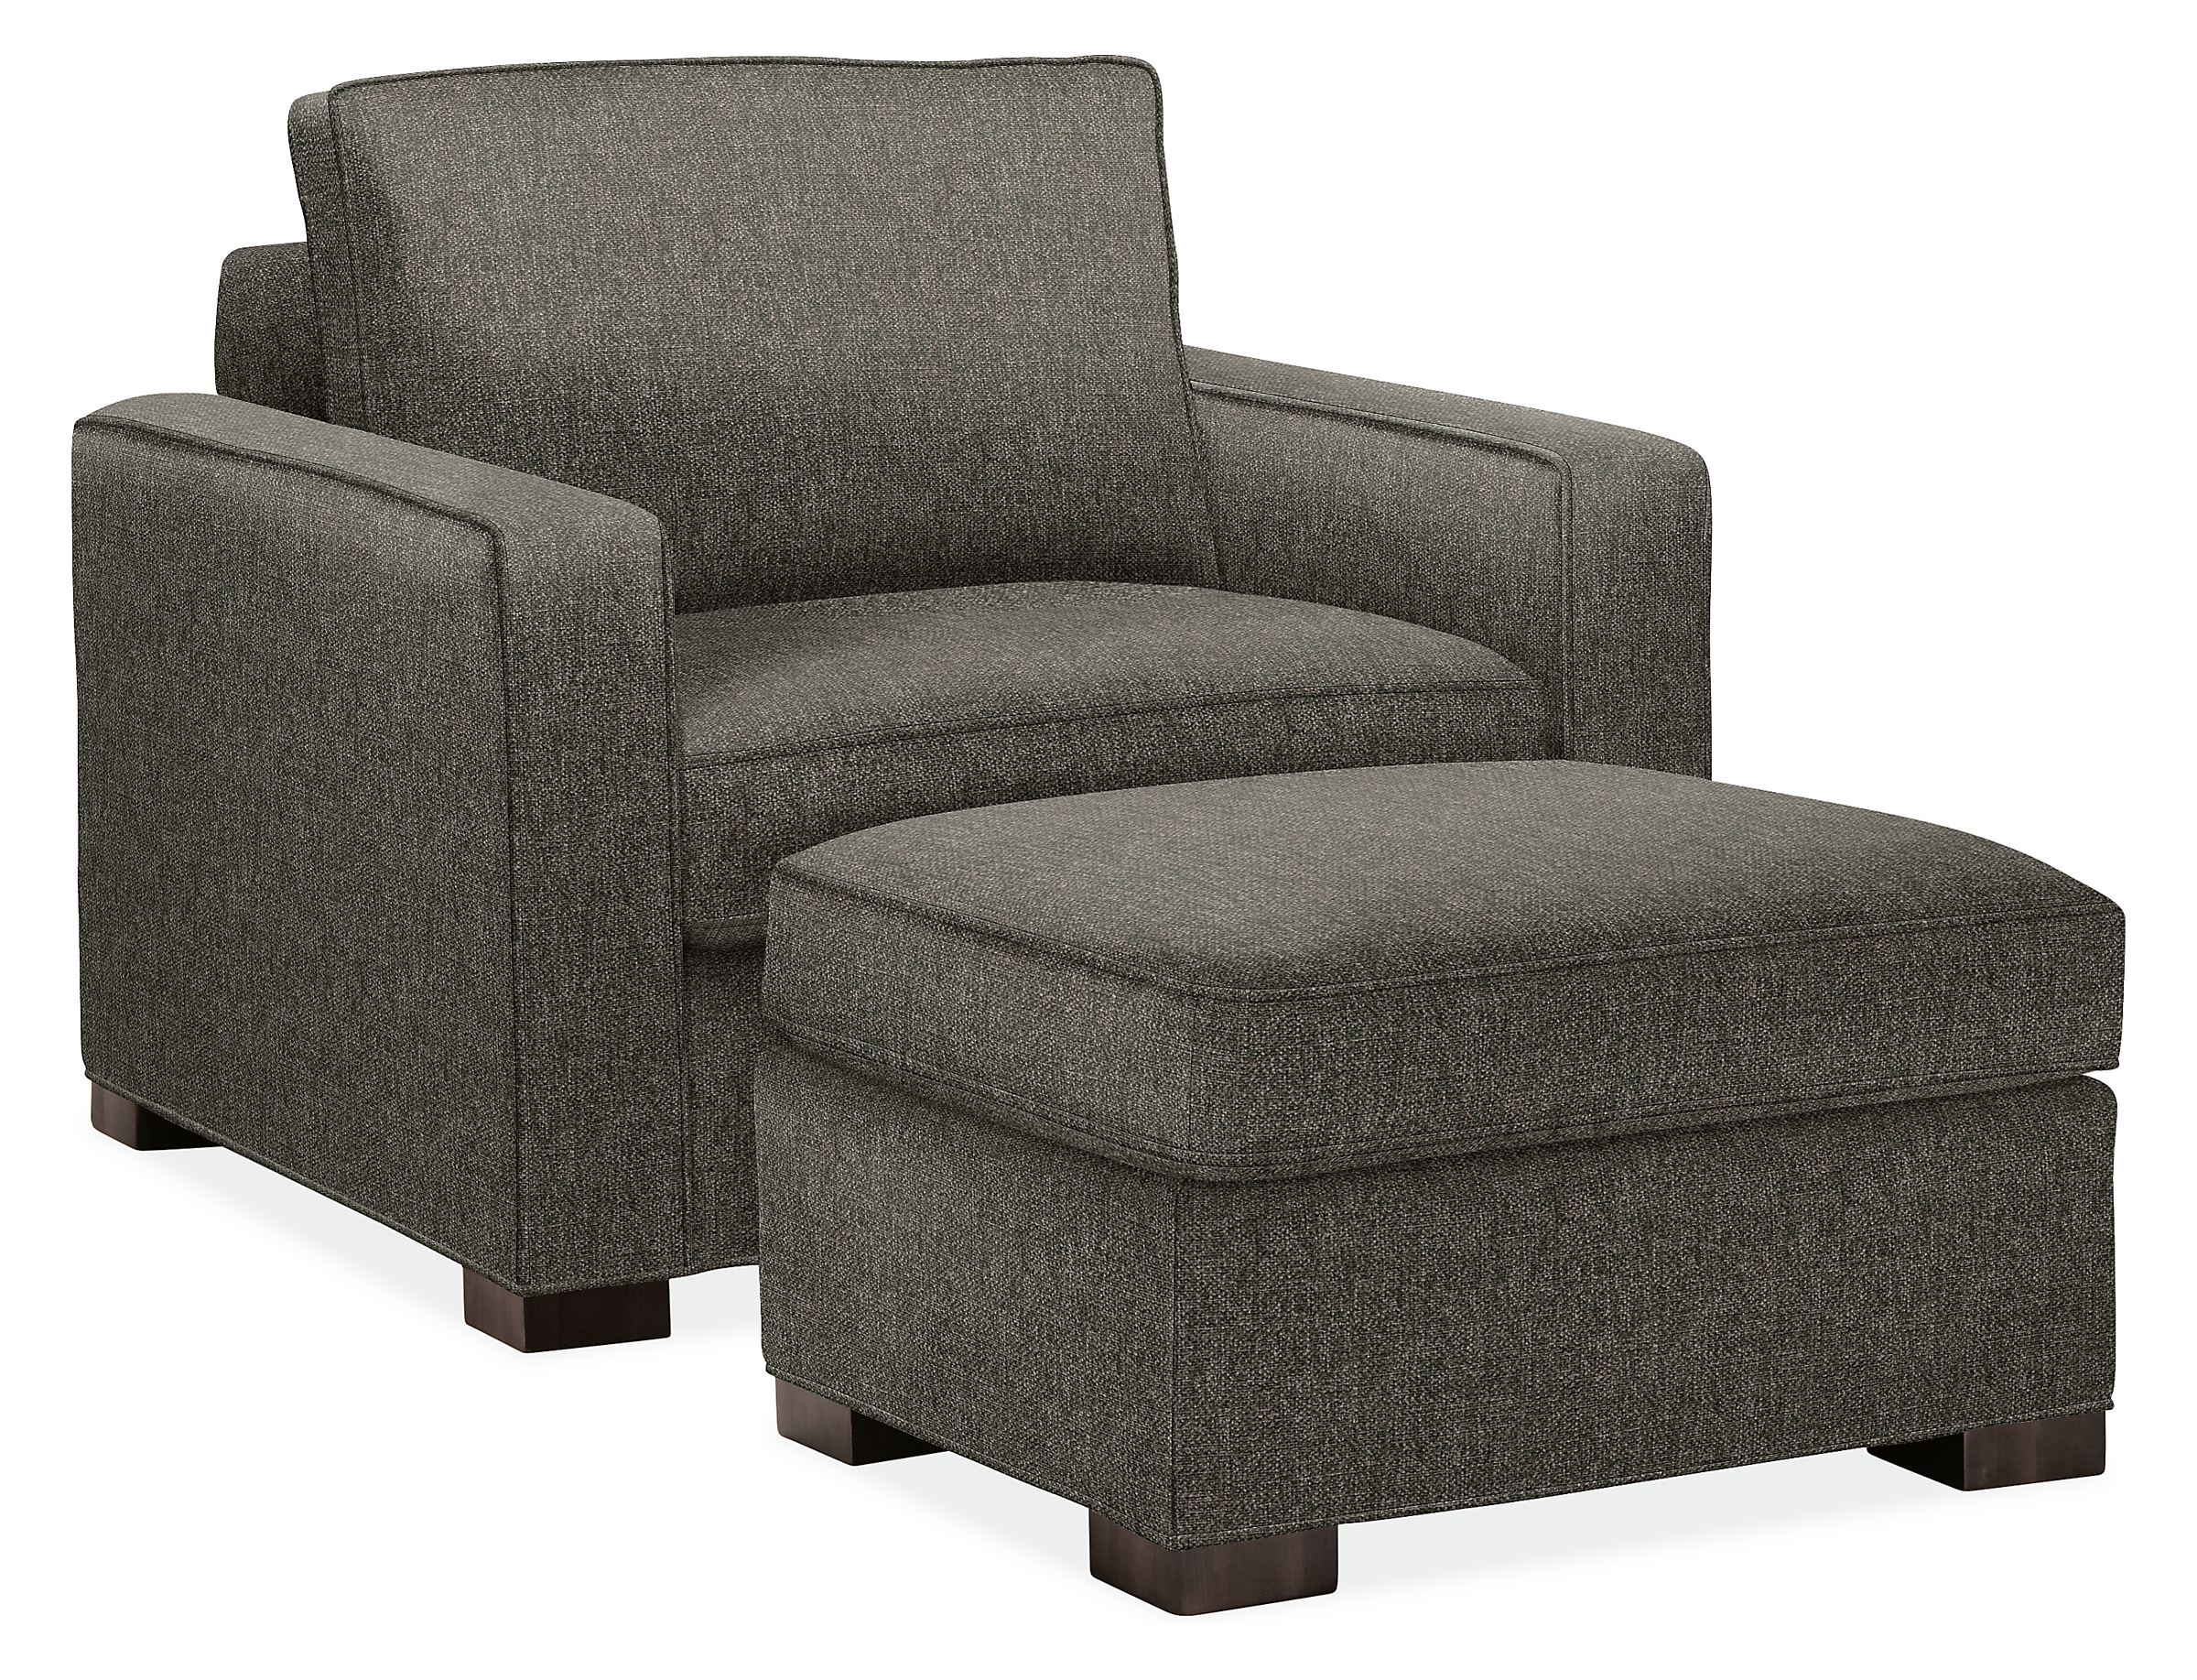 Morrison Chair and Ottoman in Tepic Charcoal.